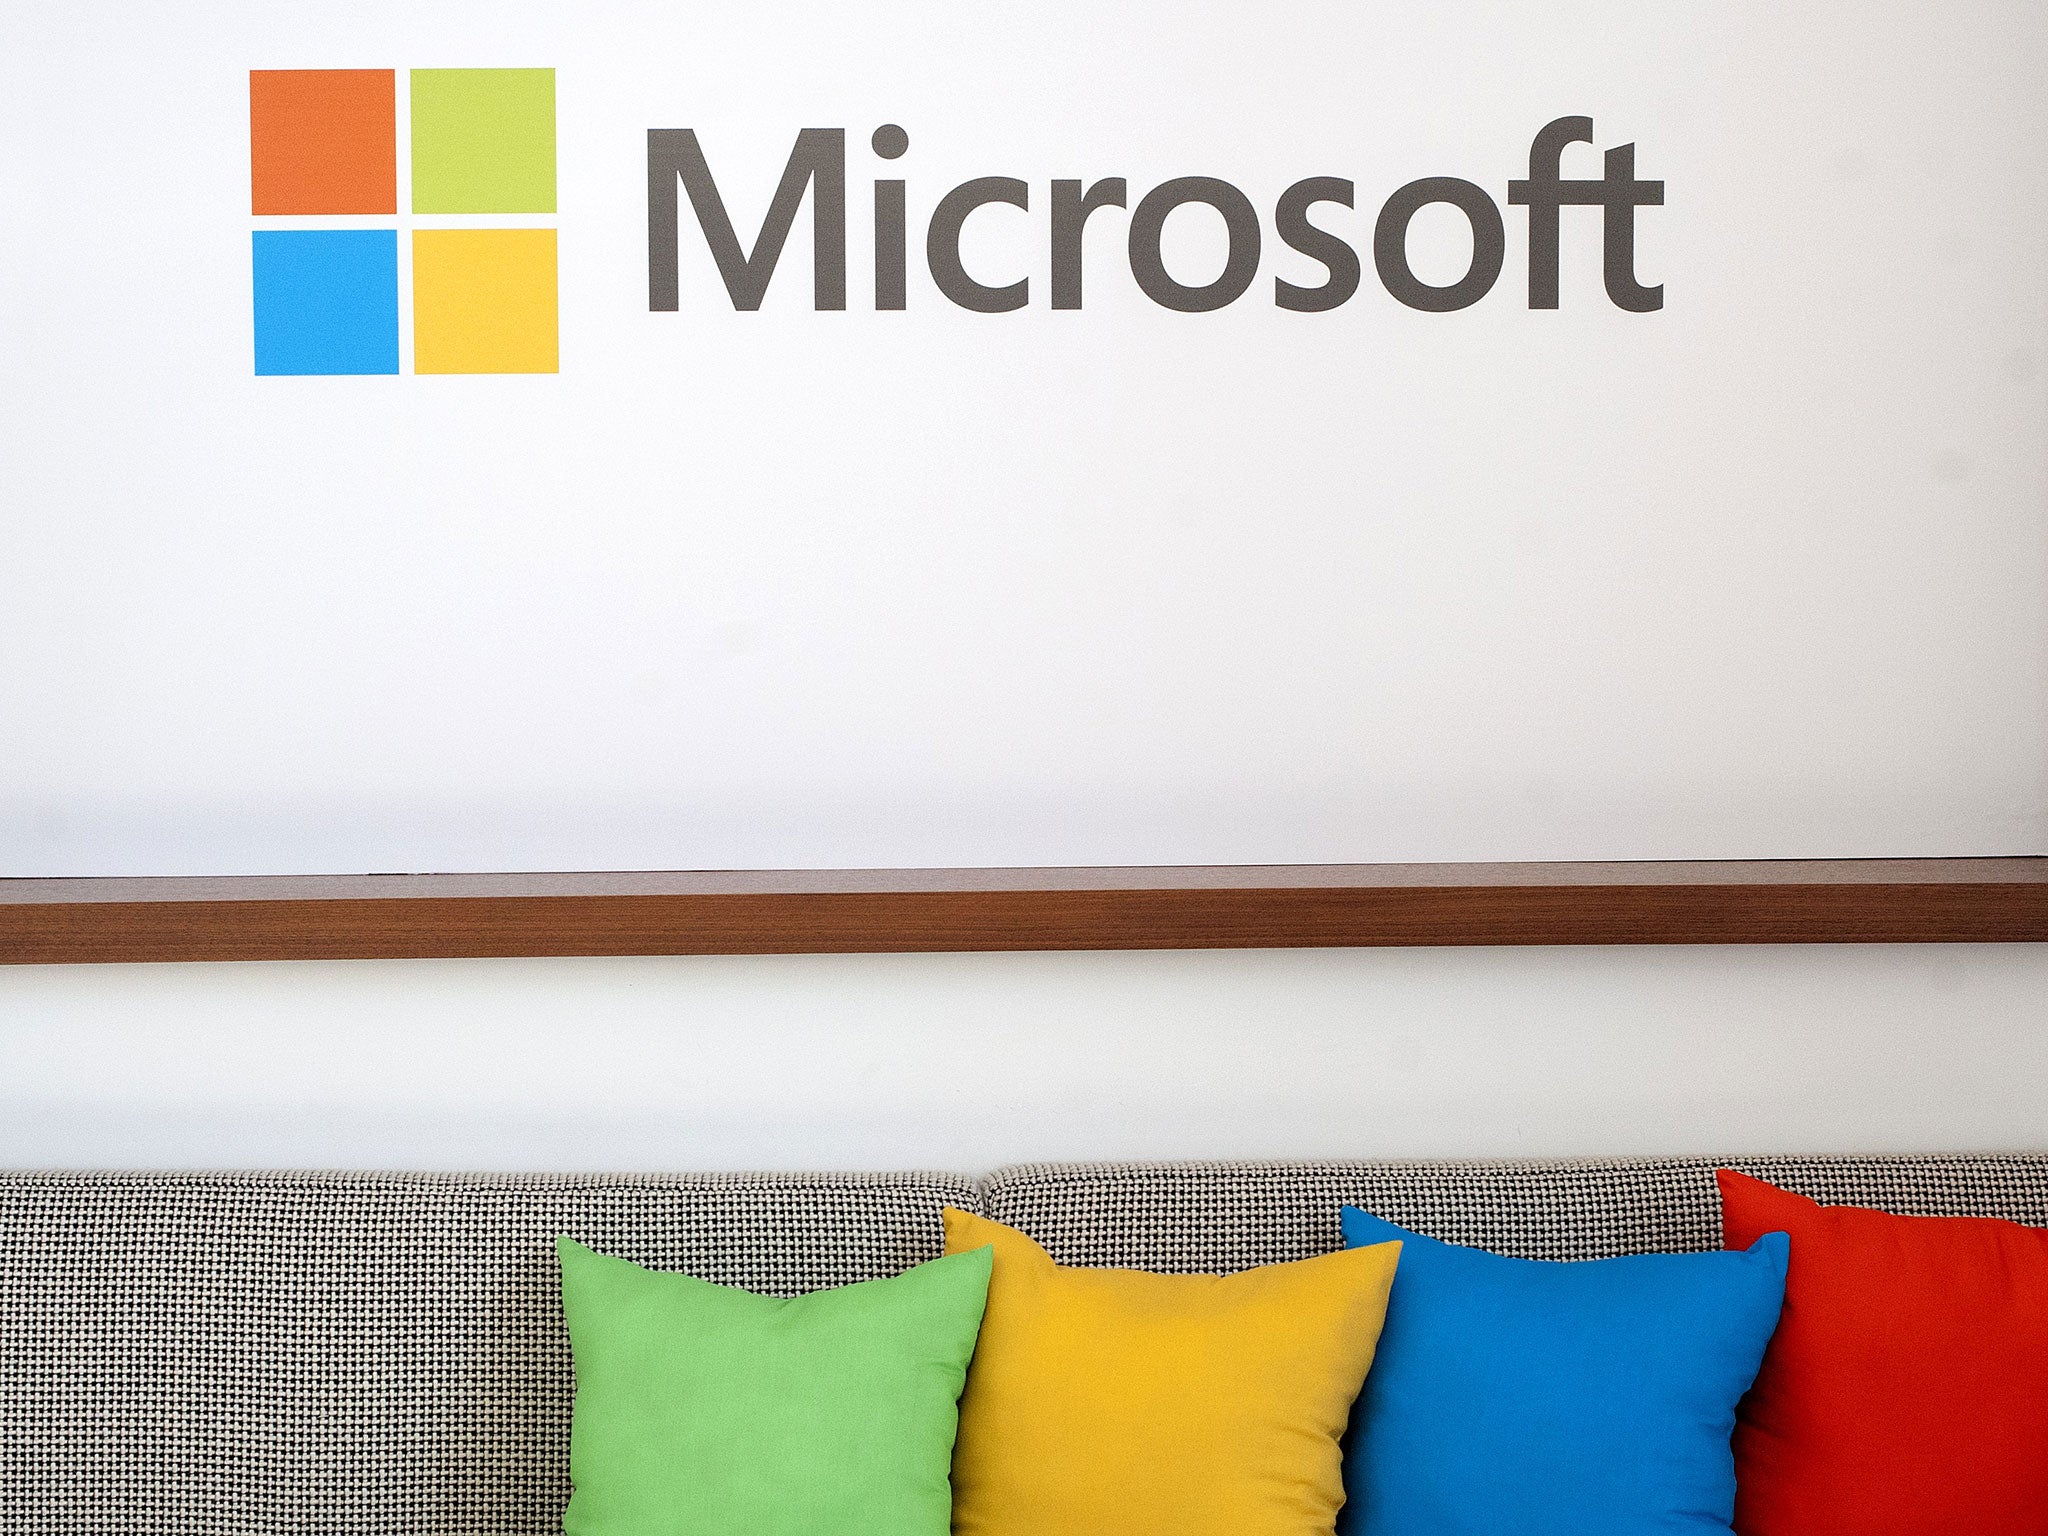 The Microsoft logo is seen before the start of a media event in San Francisco, California on Thursday, March 27, 2014. Satya Nadella, CEO of Microsoft, unveiled a version of Office designed for the iPad today. Microsoft is tapping into its software past a